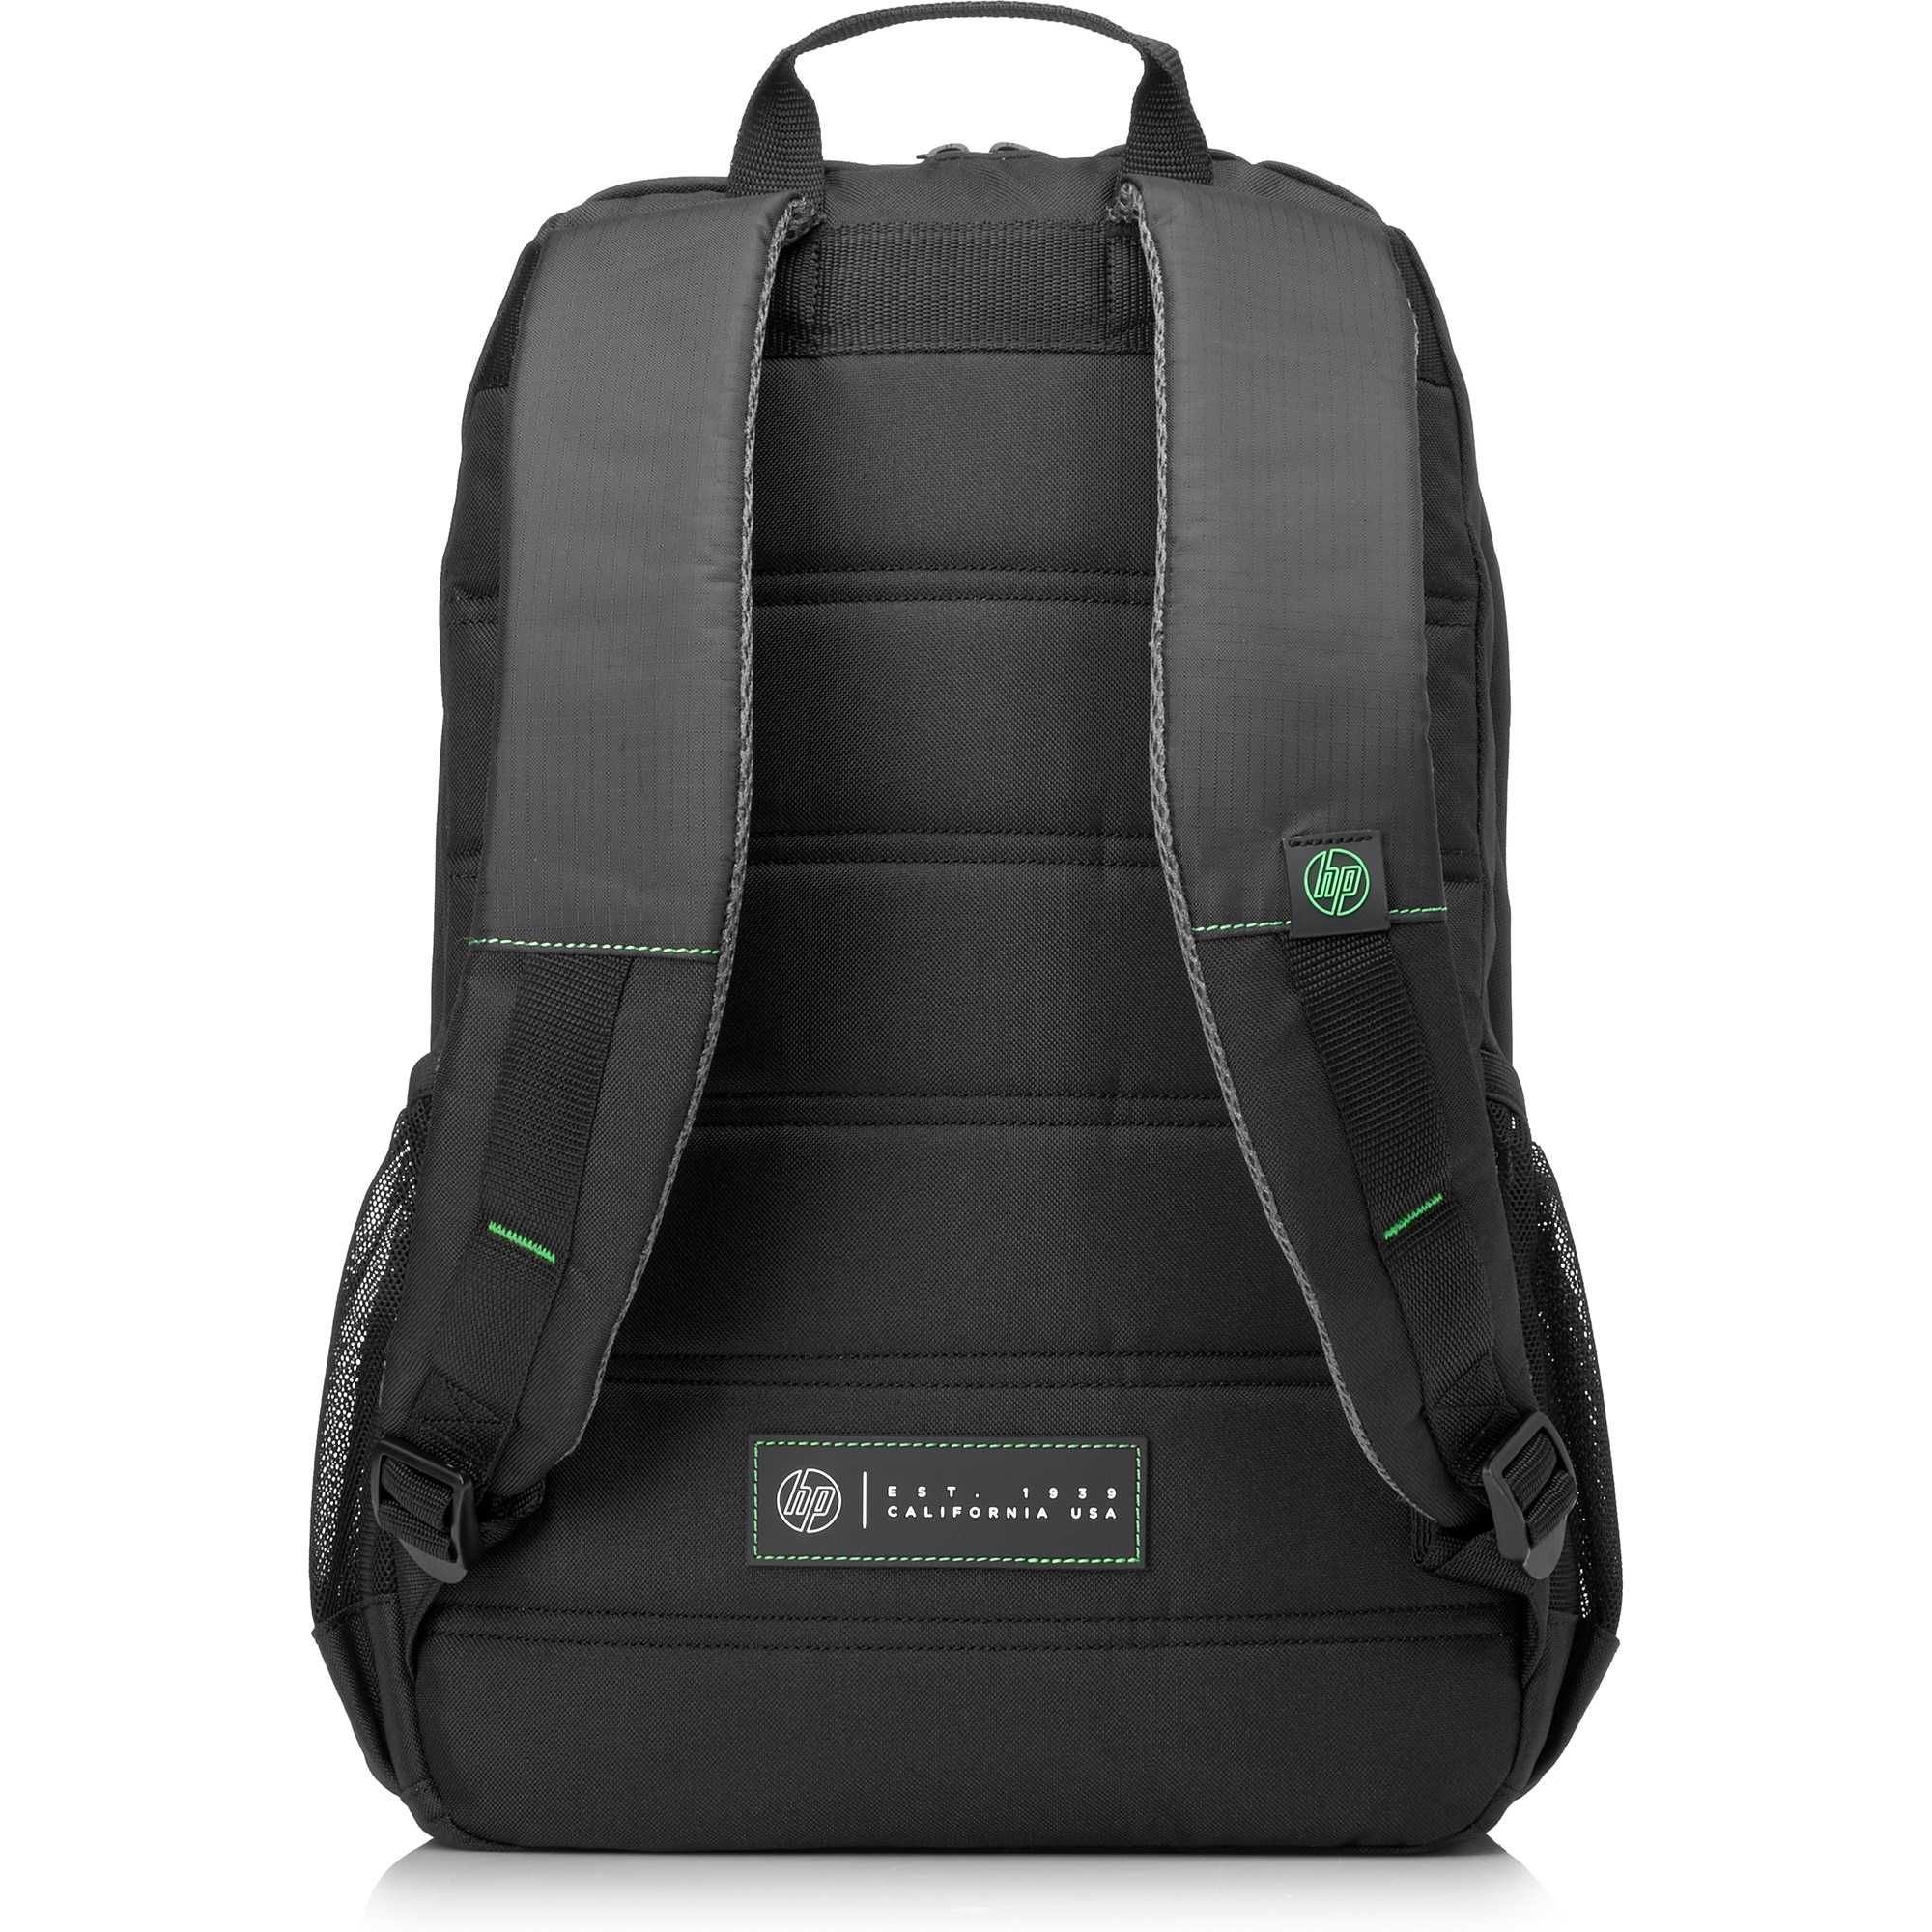 Раница за лаптоп 15.6 HP Active Backpack (Black/Mint Green)